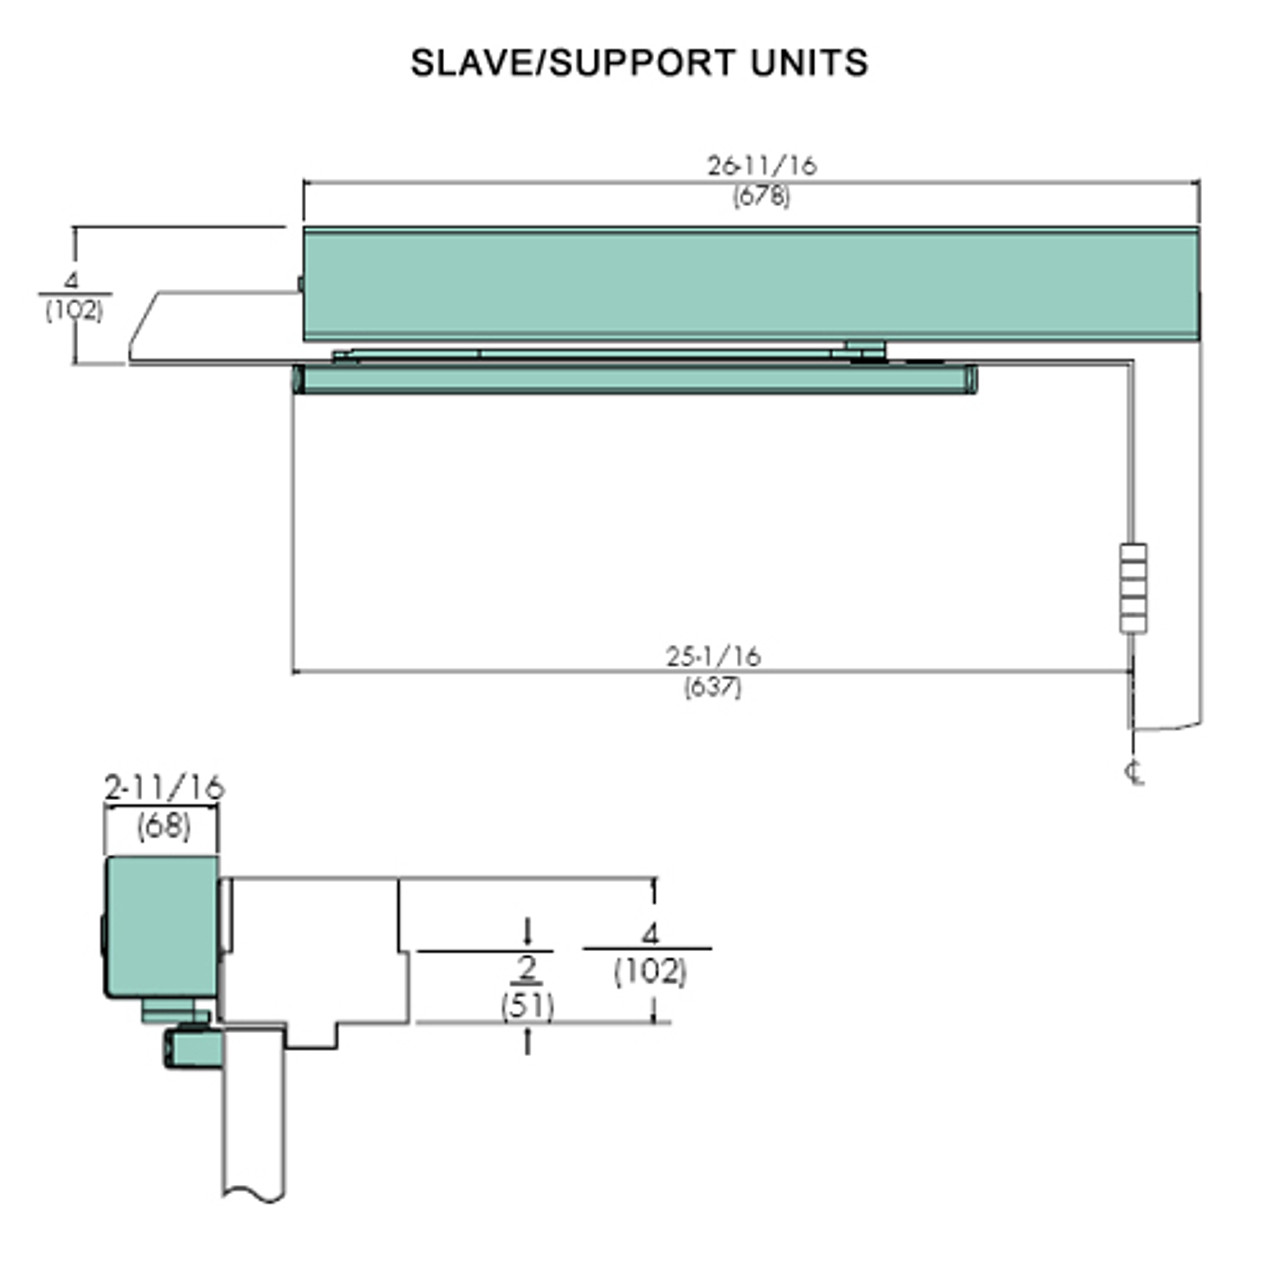 7213MPSO-LH-24VDC-691 Norton 7200 Series Electromechanical Closer and Holder with Rigid Arm Slide Track Slave/Support Unit in Dull Bronze Finish